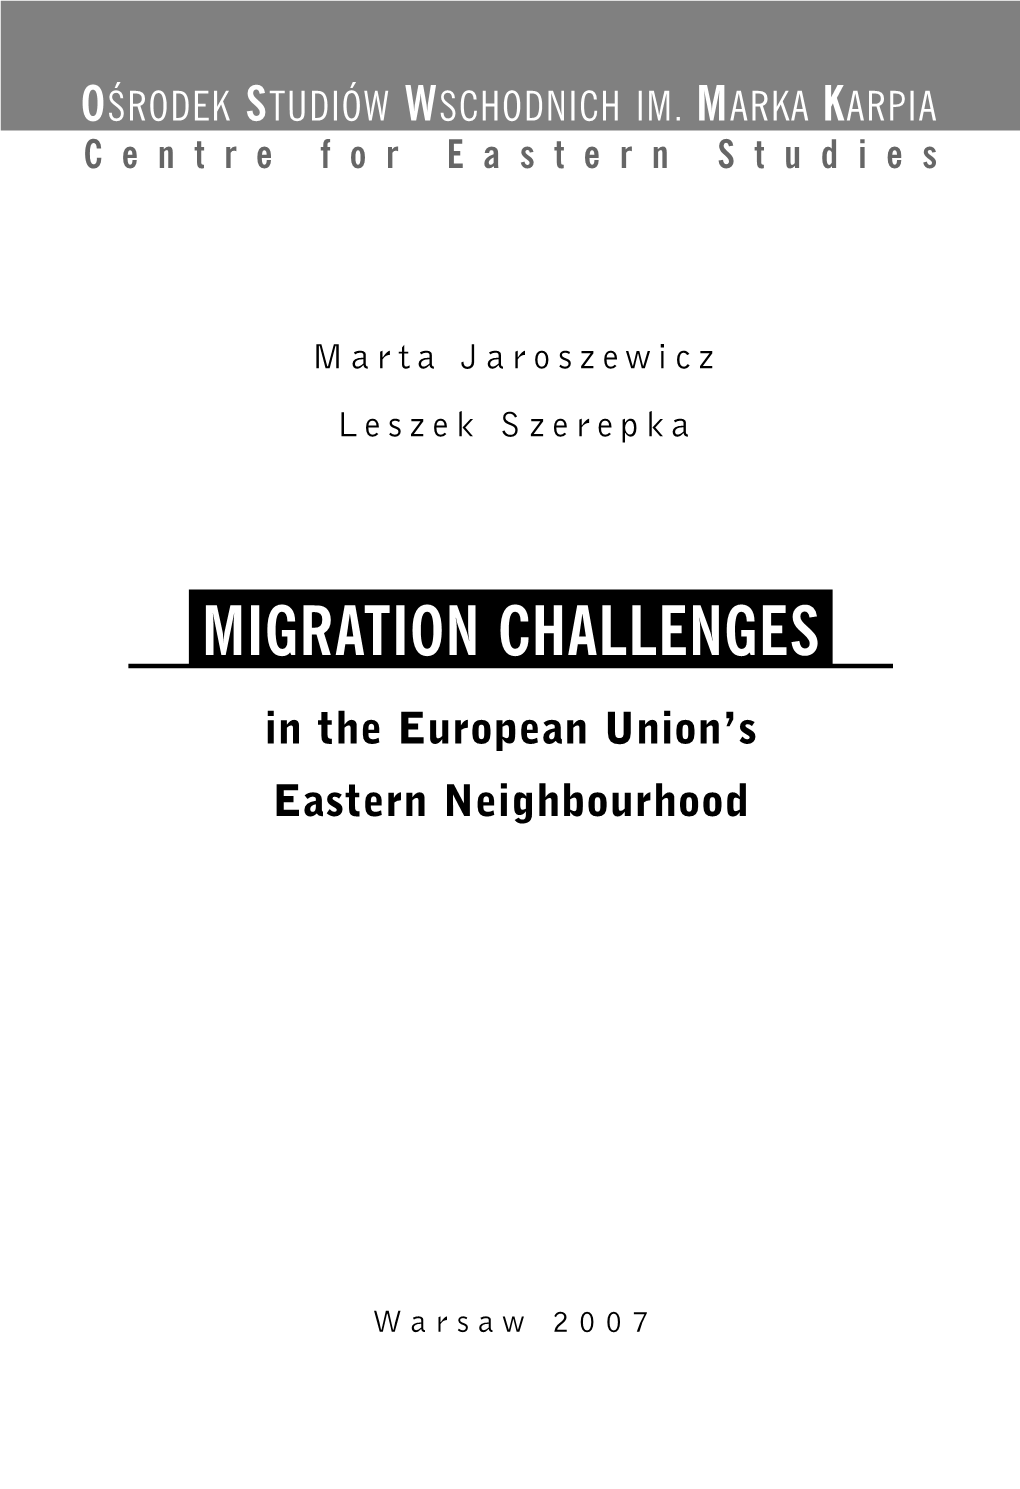 MIGRATION CHALLENGES in the European Union’S Eastern Neighbourhood